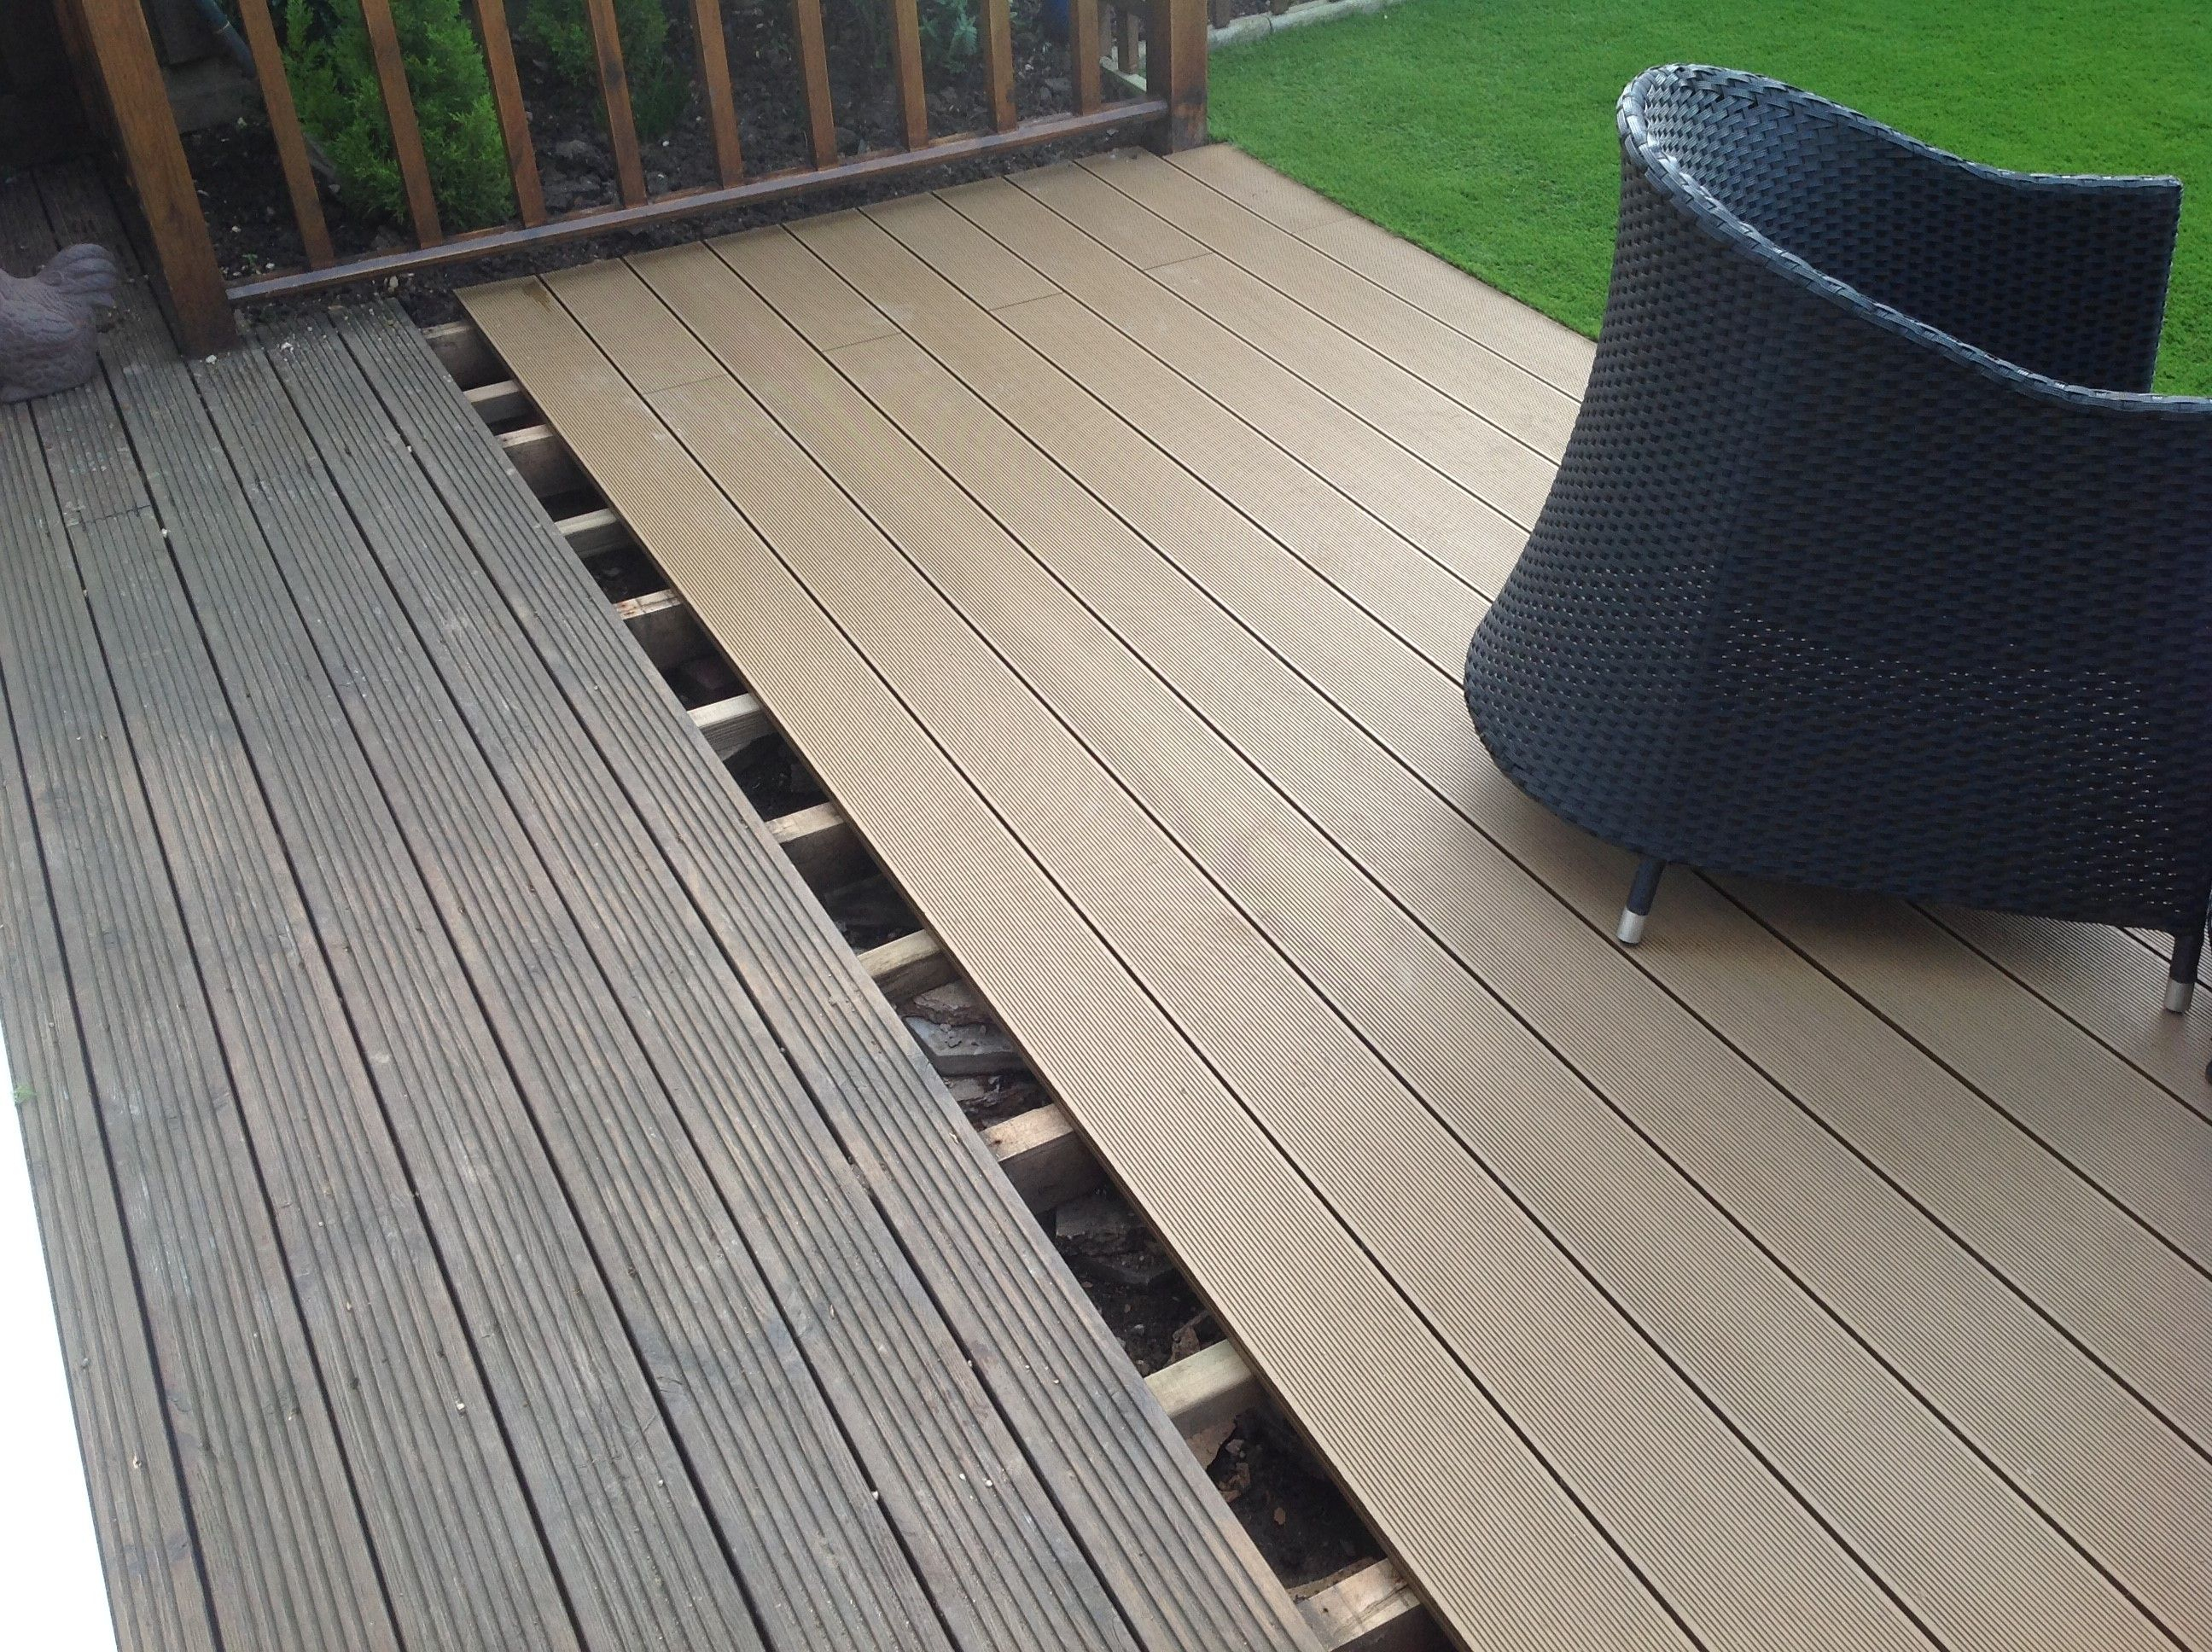 Cladco Composite Decking Vs Timber Decking Cladco Composte Decking within measurements 2592 X 1936